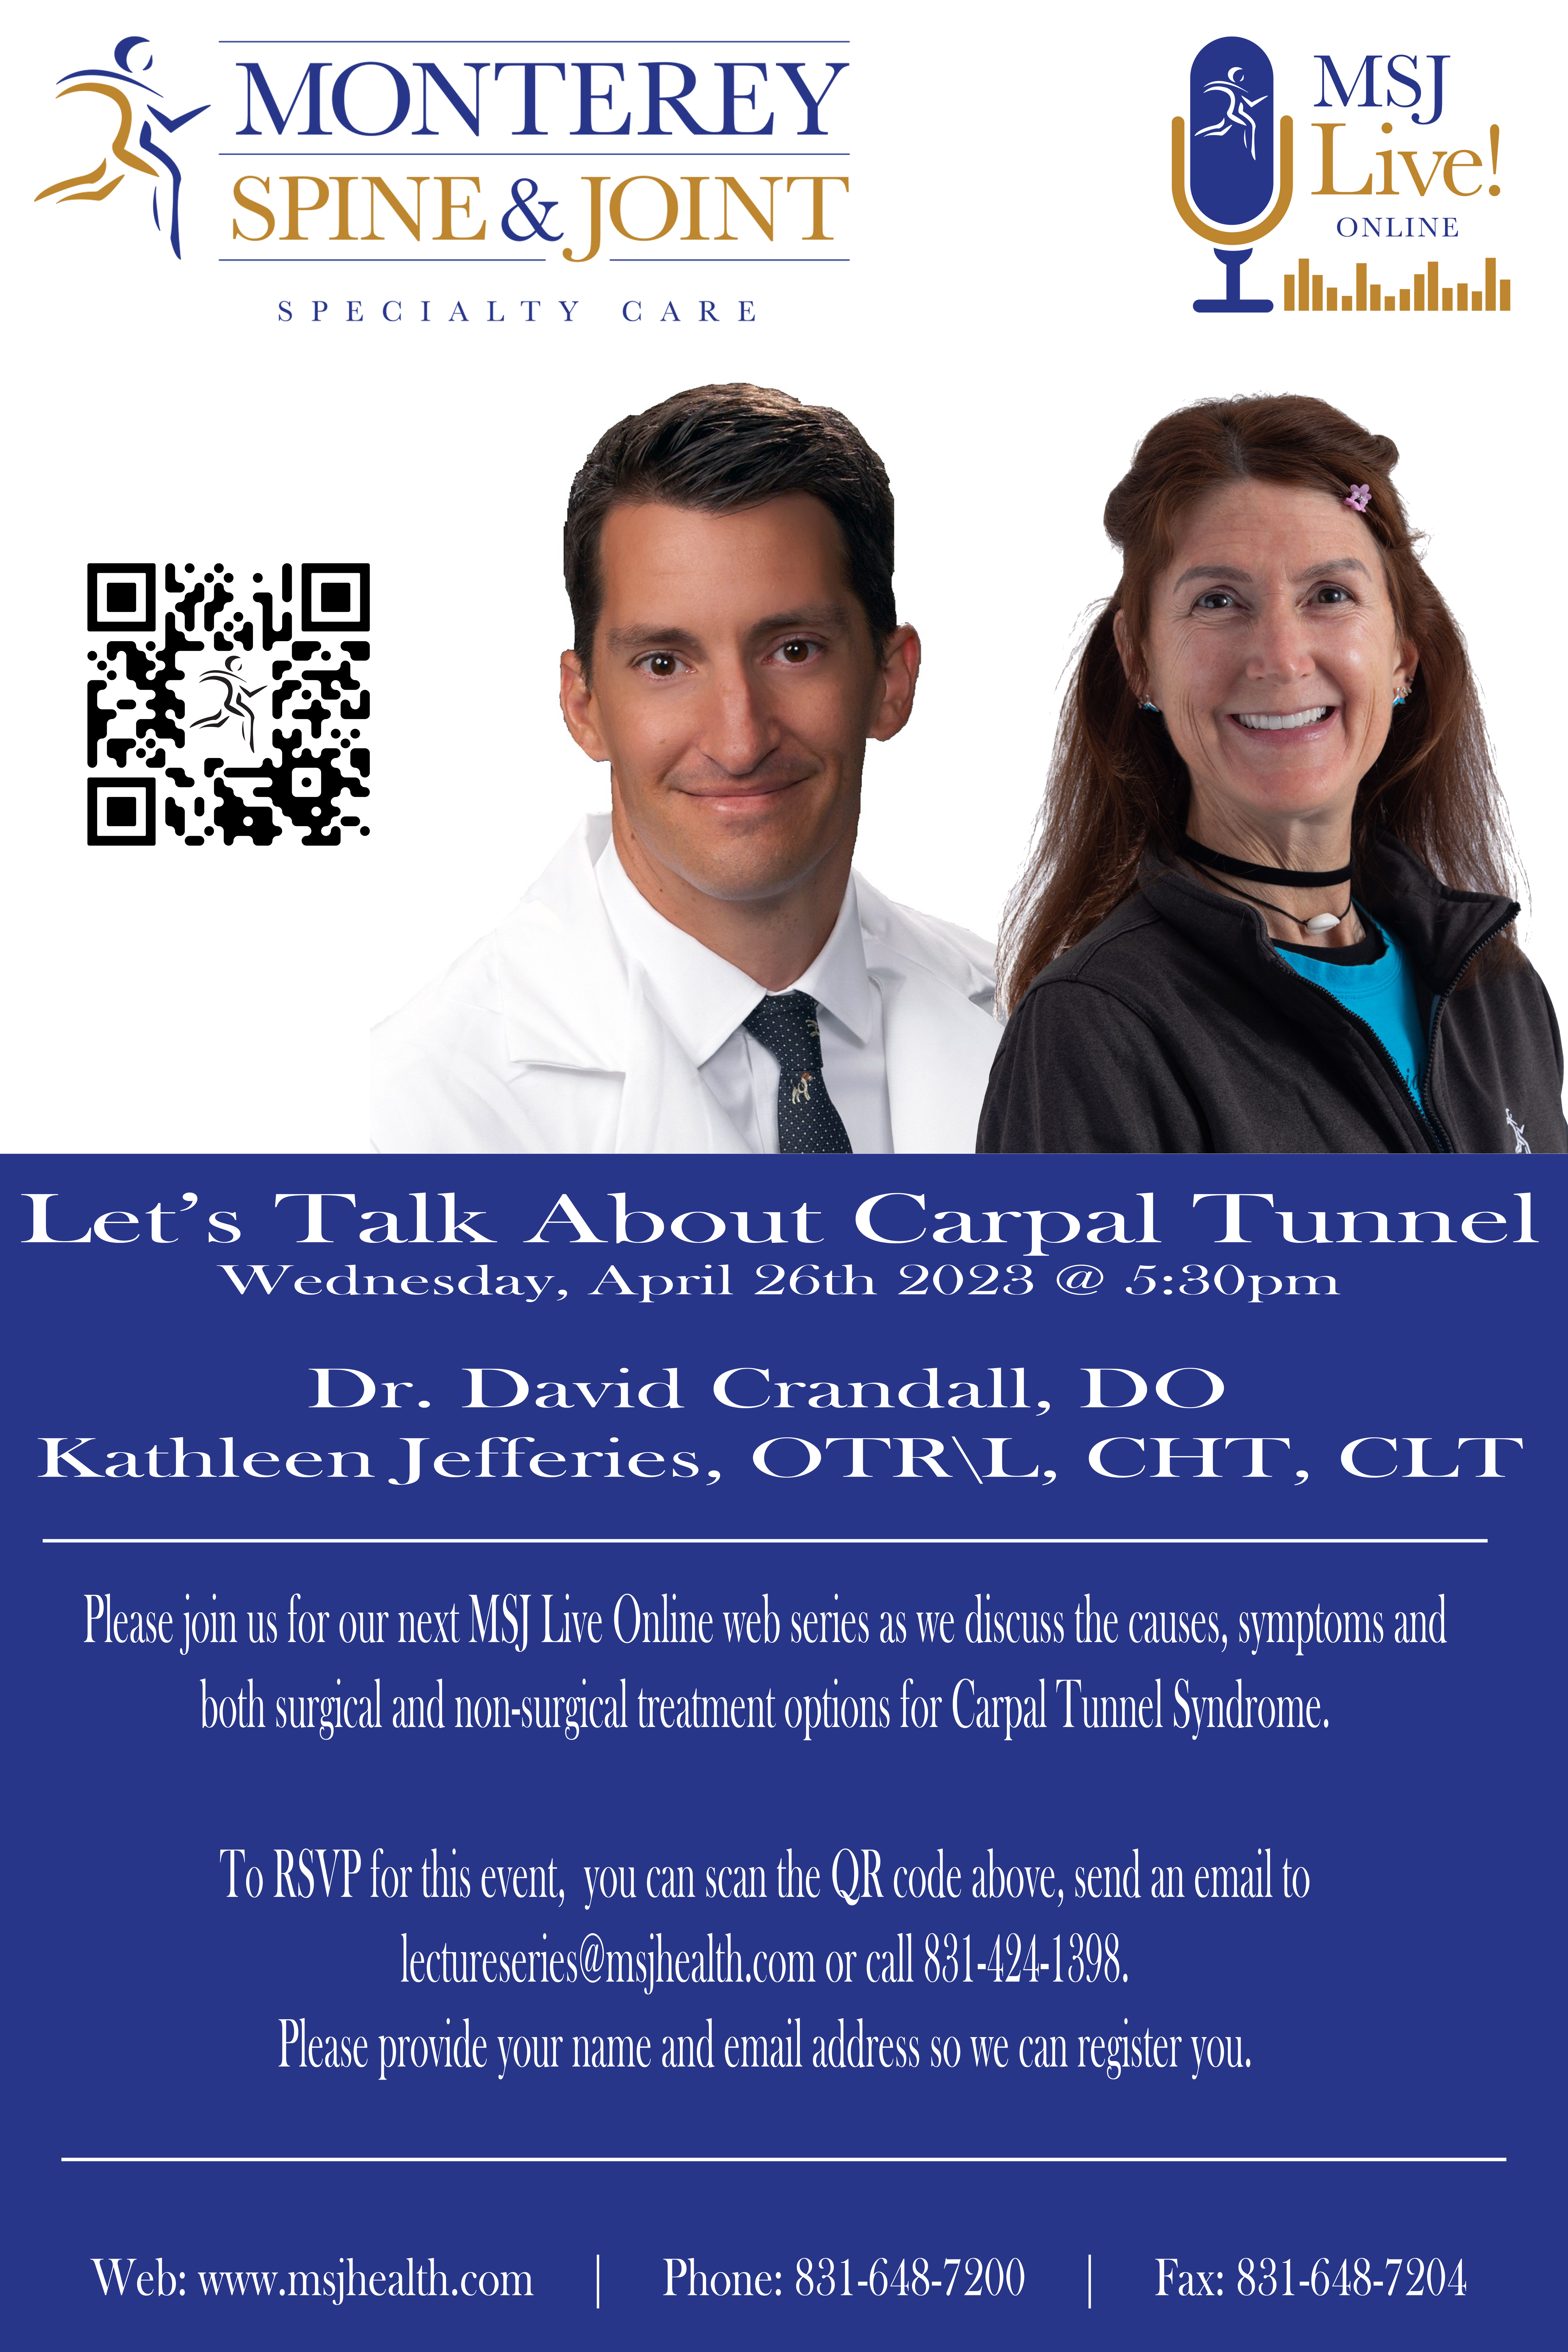 MSJ Live Online Web Series information on April 26th 2023 Let's Talk About Carpal Tunnel session